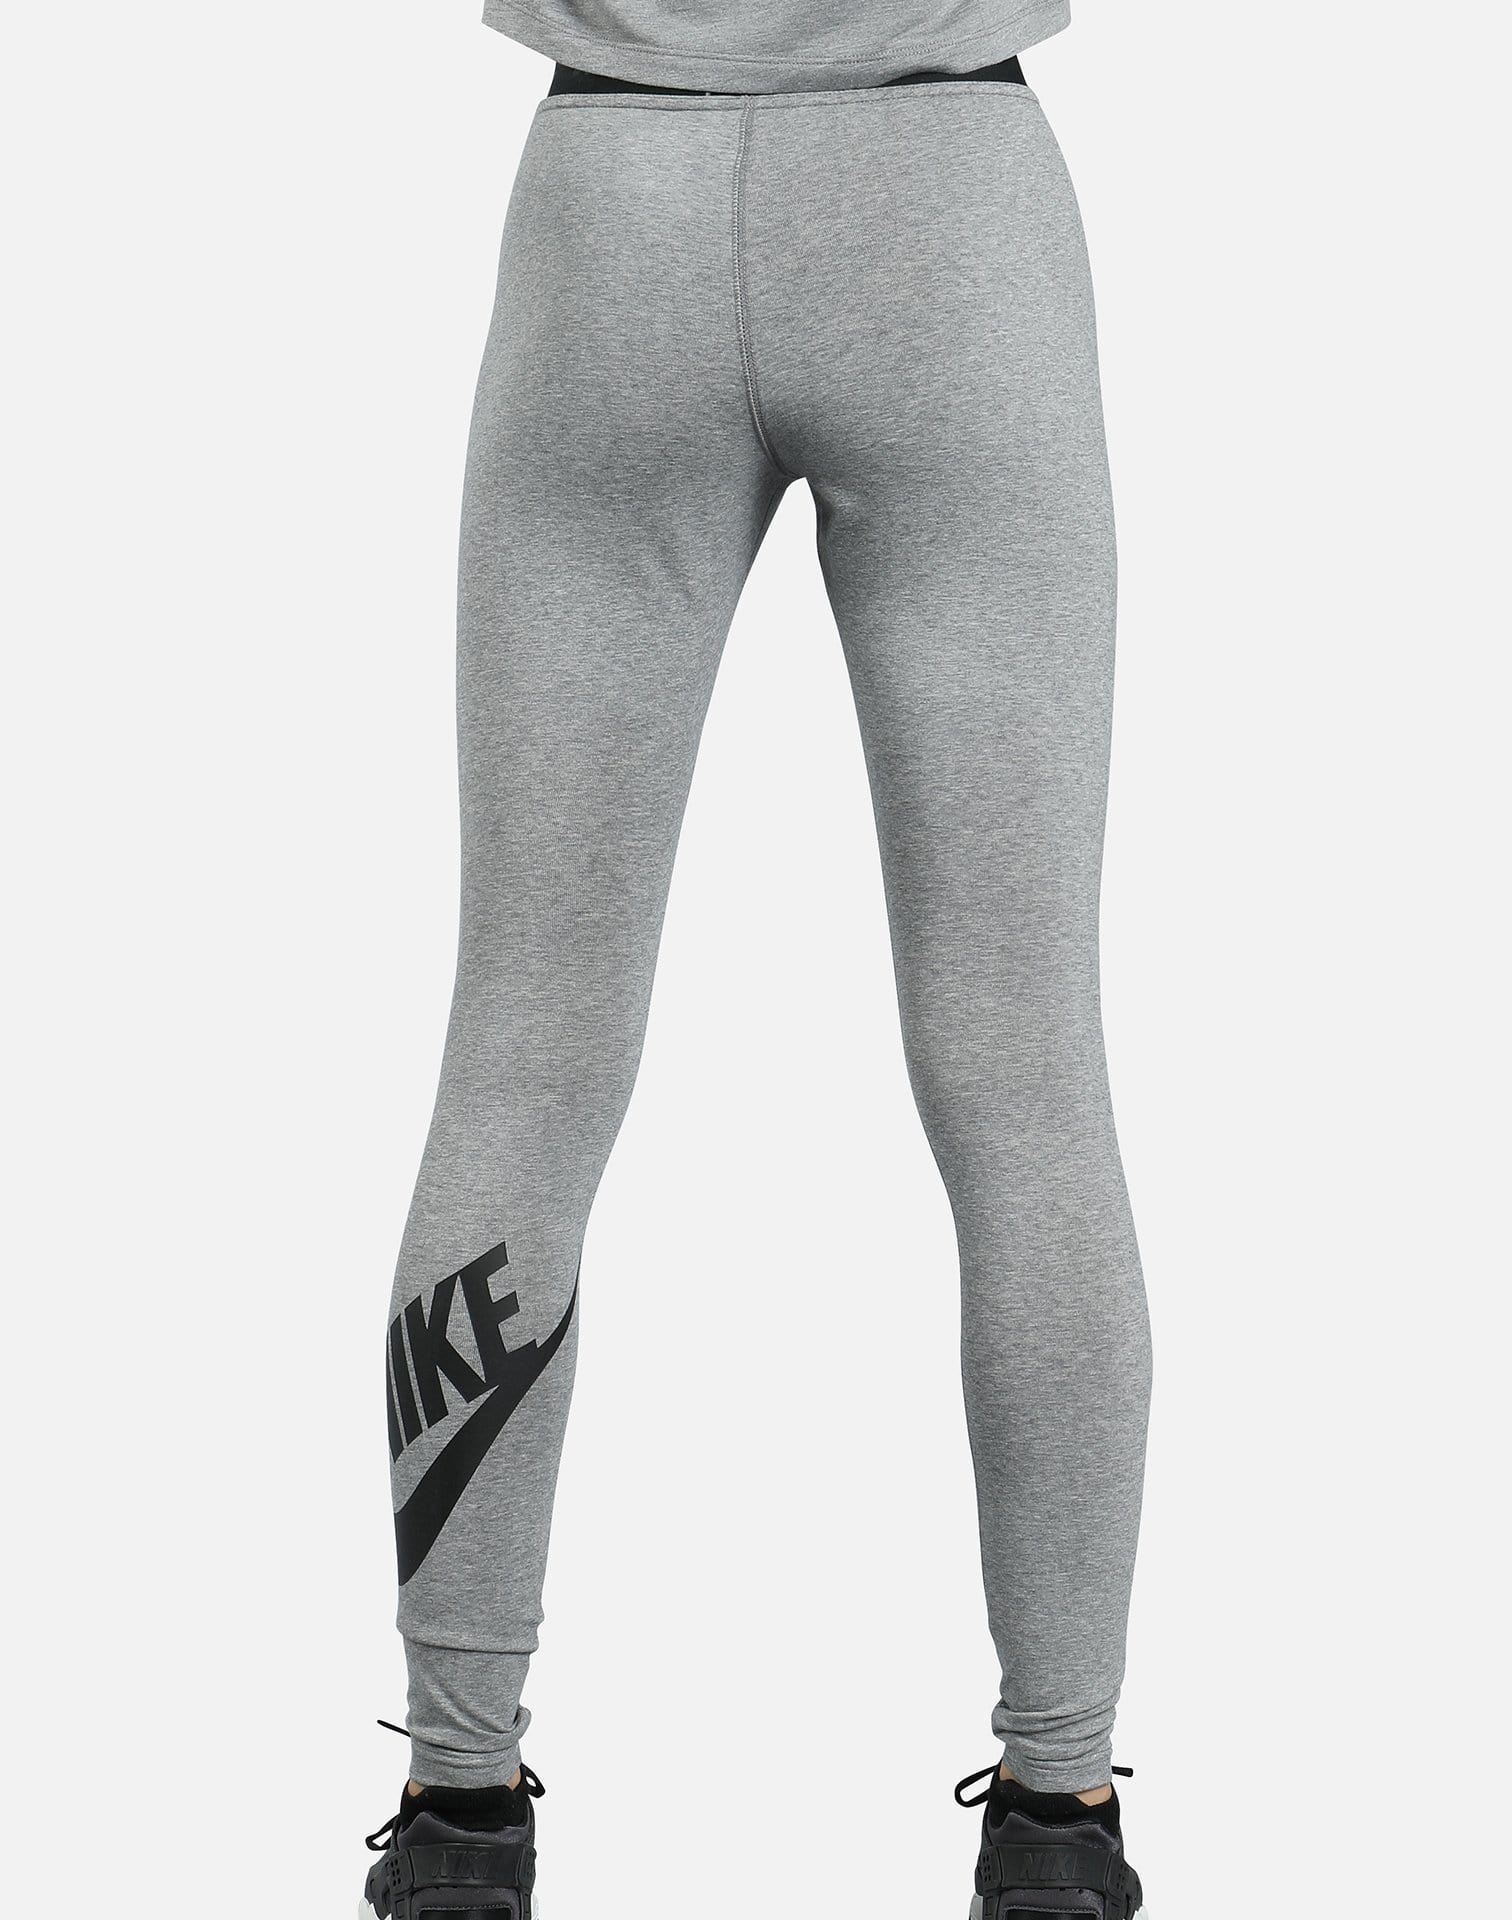 Nike NSW HIGH-WASITED LEG-A-SEE LEGGINGS – DTLR